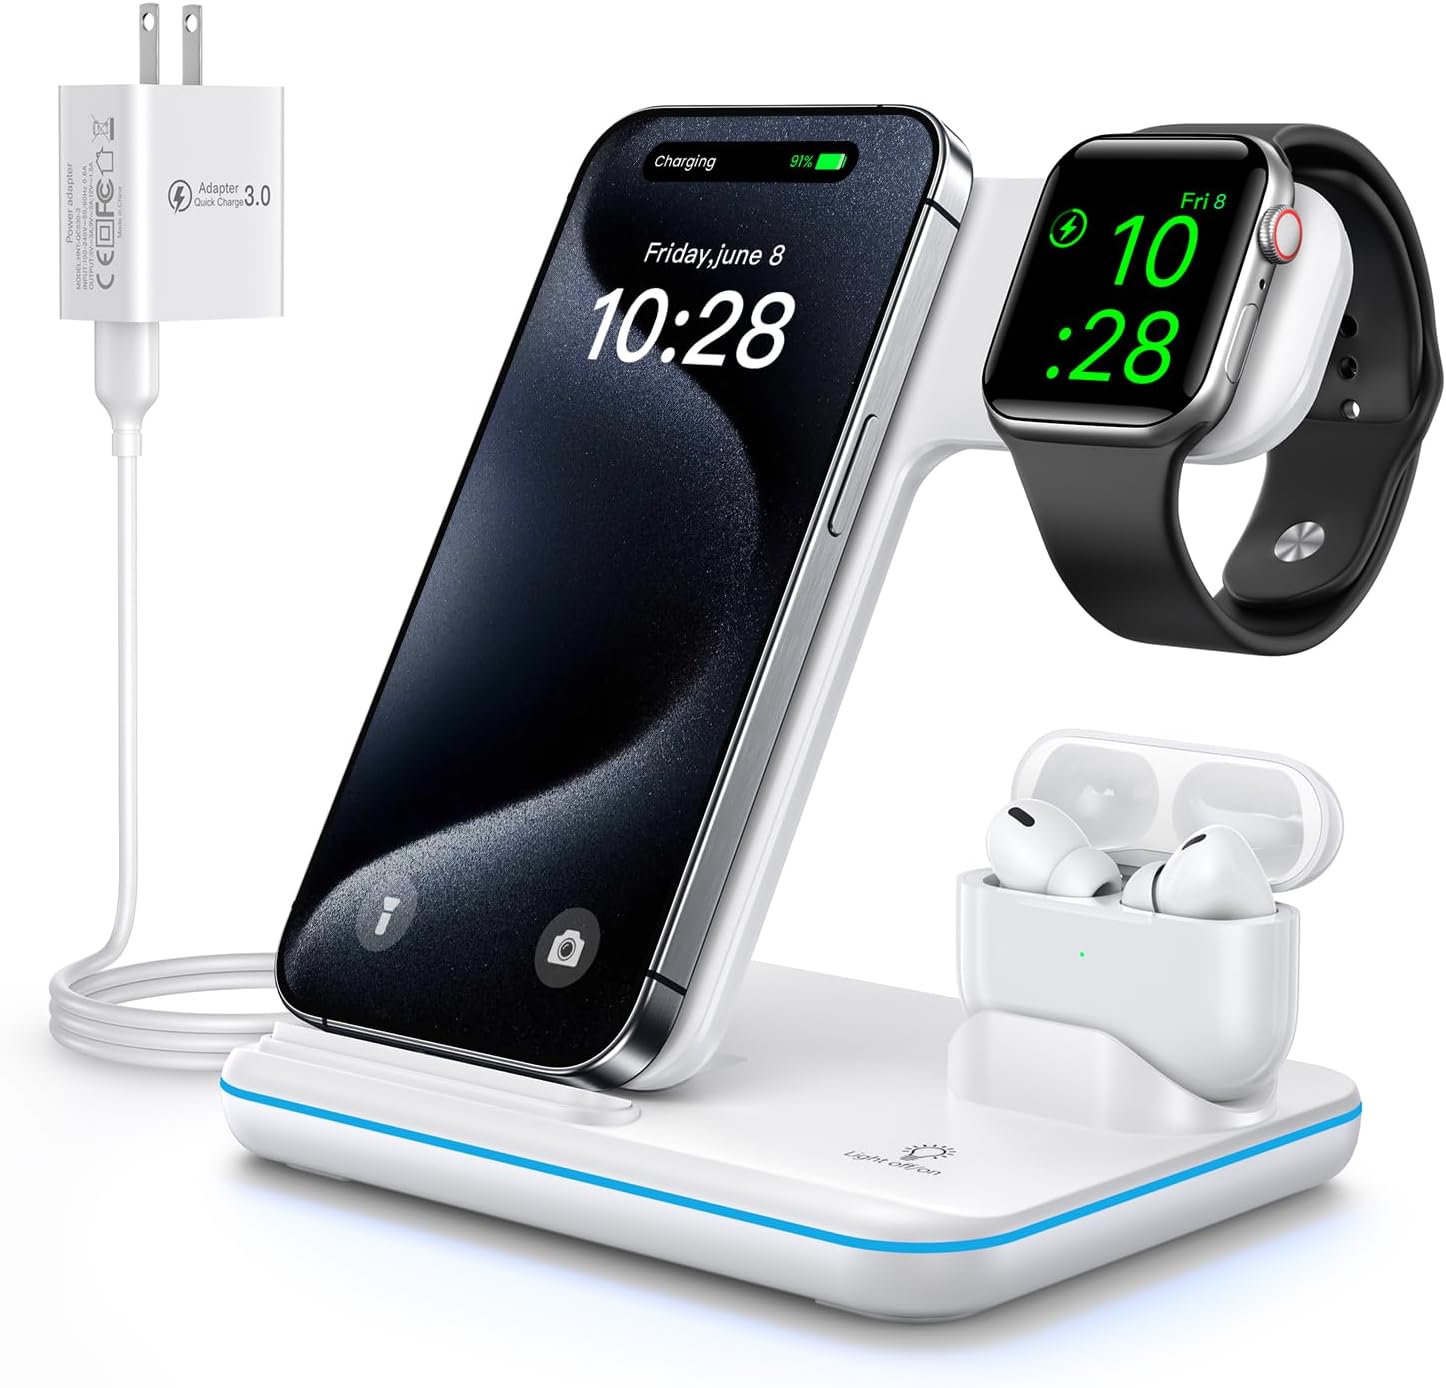 I had bought a3 in 1 charger last month. Used it twice. Watch didn't have any magnets to hold it tight against the charger and phone never charged. Sent them back and ordered this one! Impressive! Quick charges all three devices fully and quickly! Attractive set up! Saves so much space. I am very happy with this purchase!